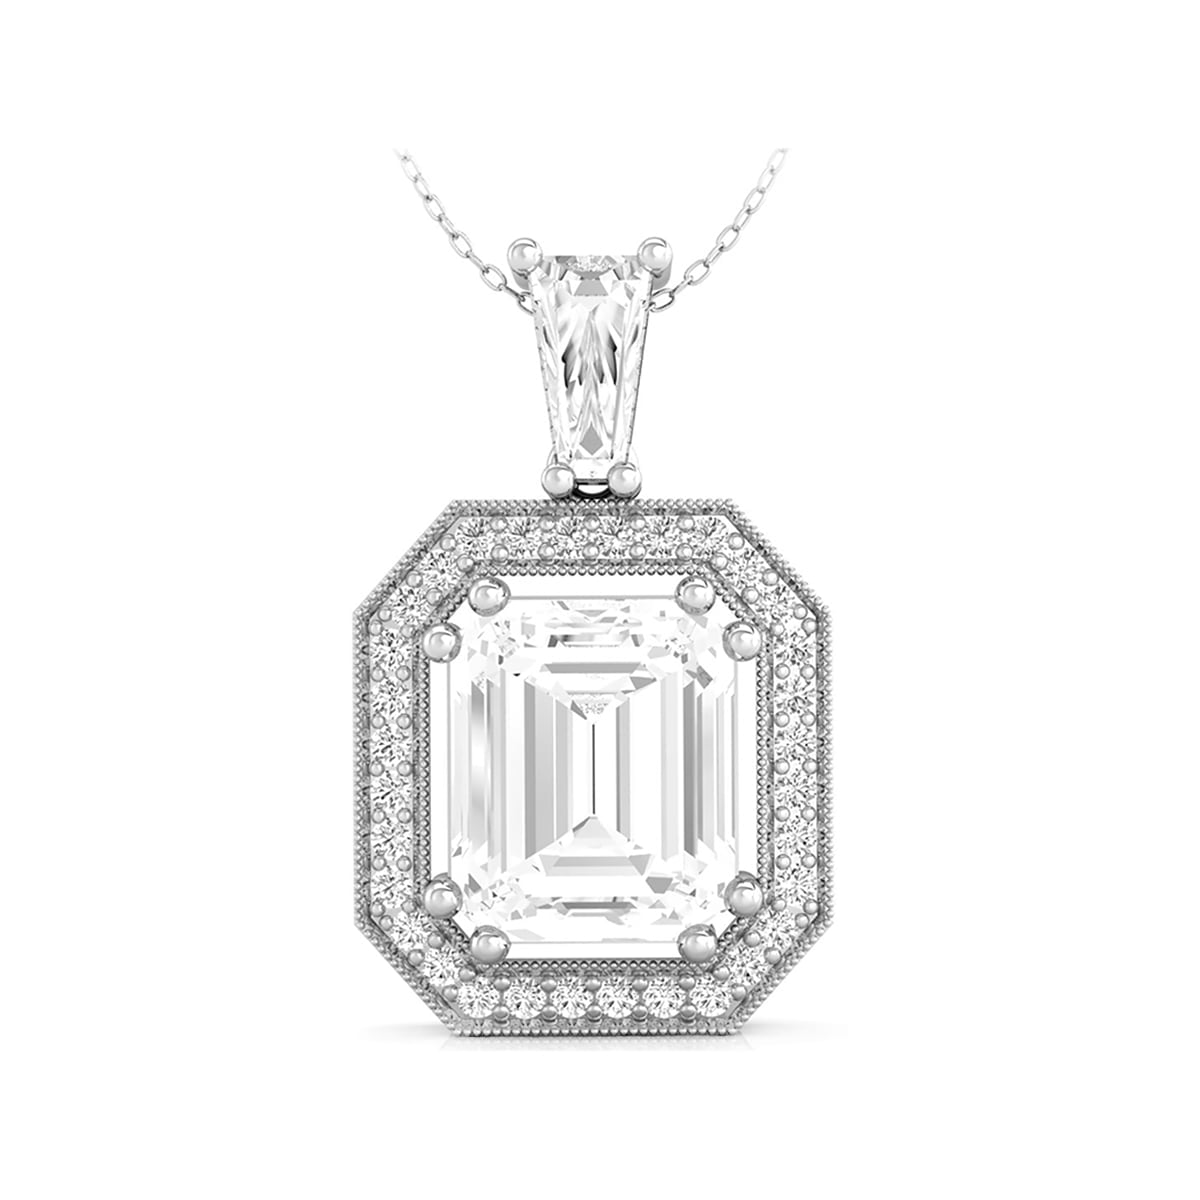 Emerald & Round Cut CZ Stone Halo Set Women's Charm Pendant Without Chain In 925 Silver